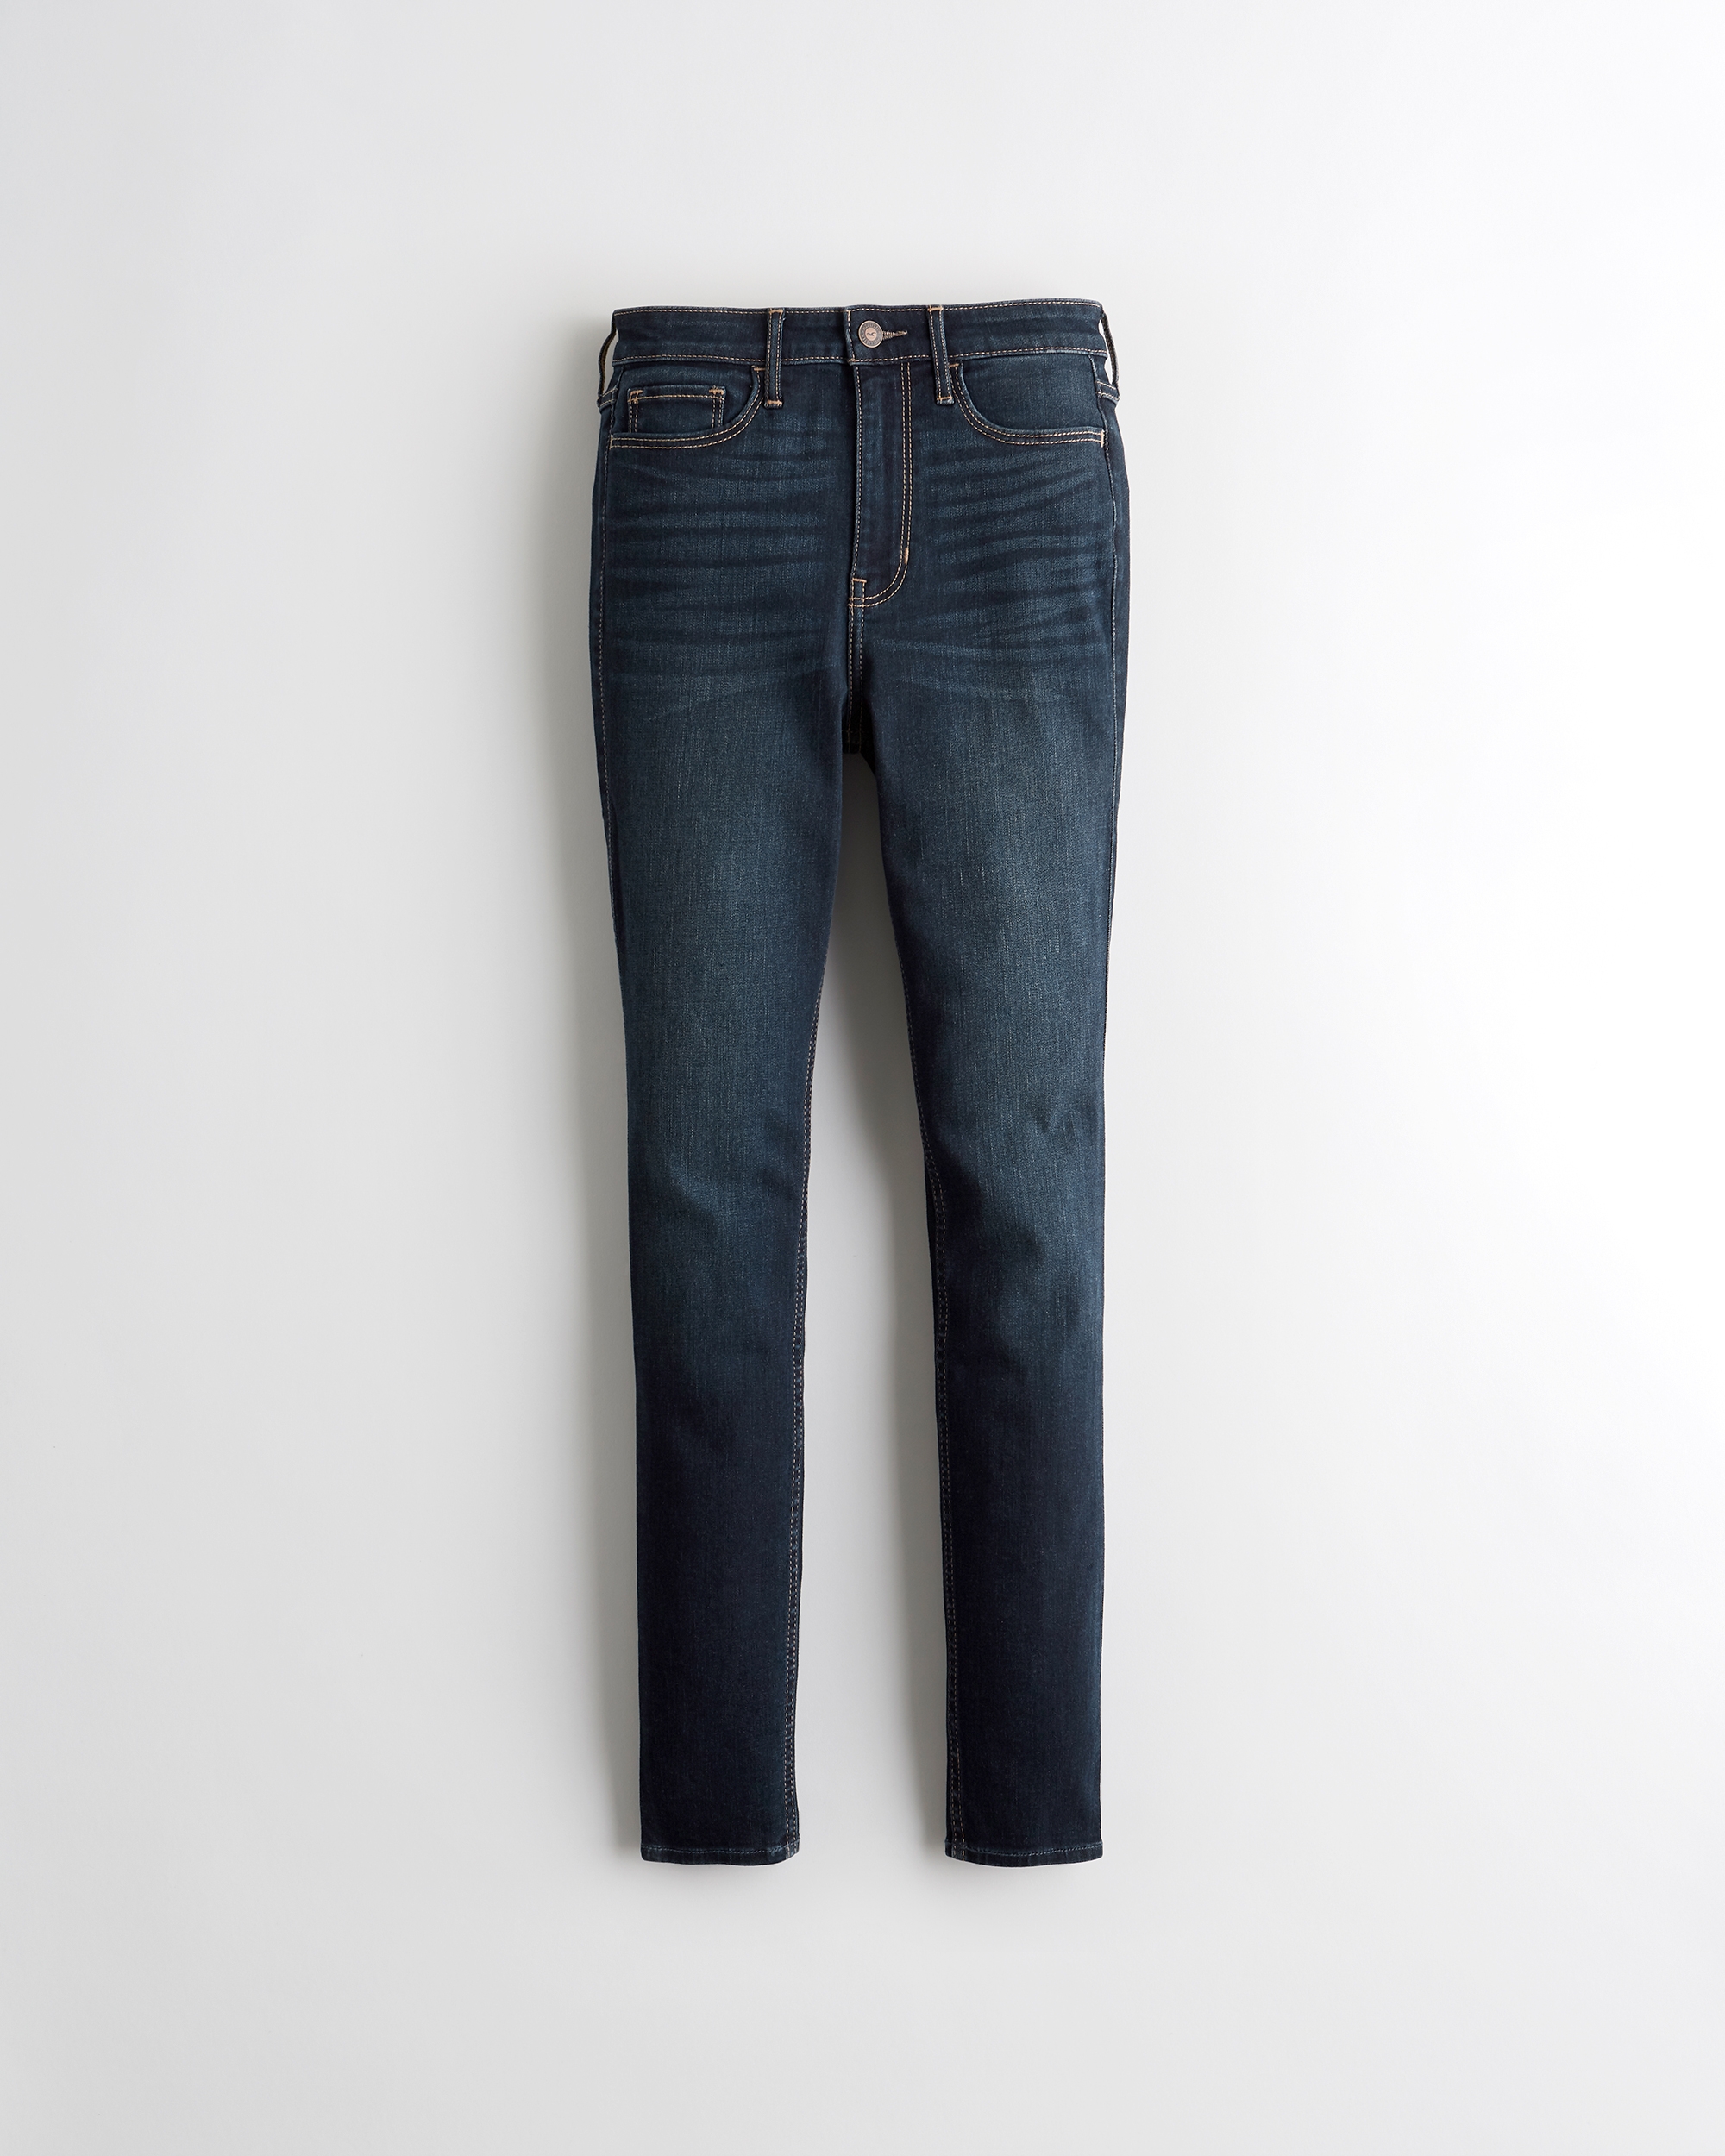 hollister jeans clearance womens